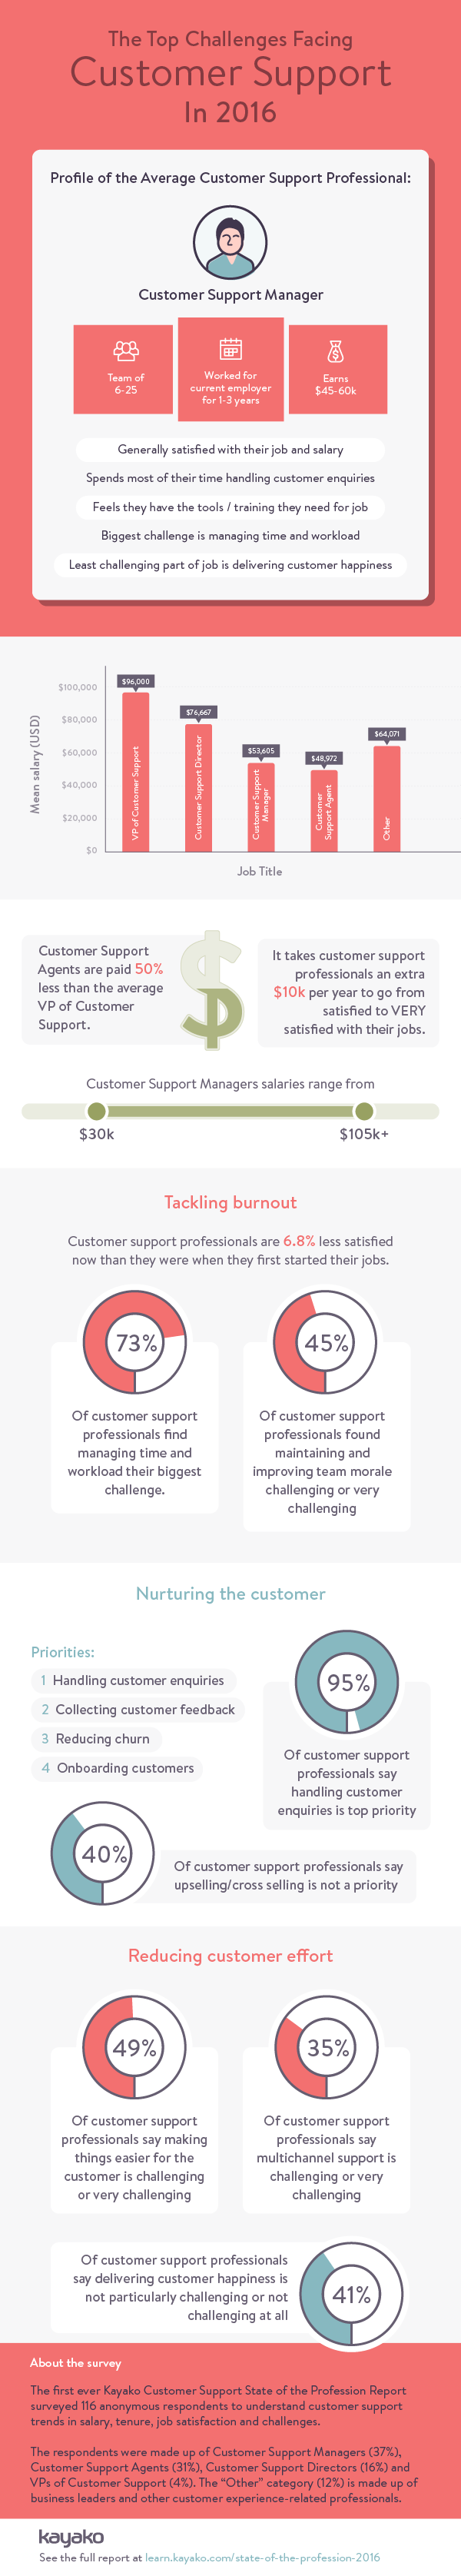 Infographic - Challenges Facing Customer Support in 2016 - Kayako